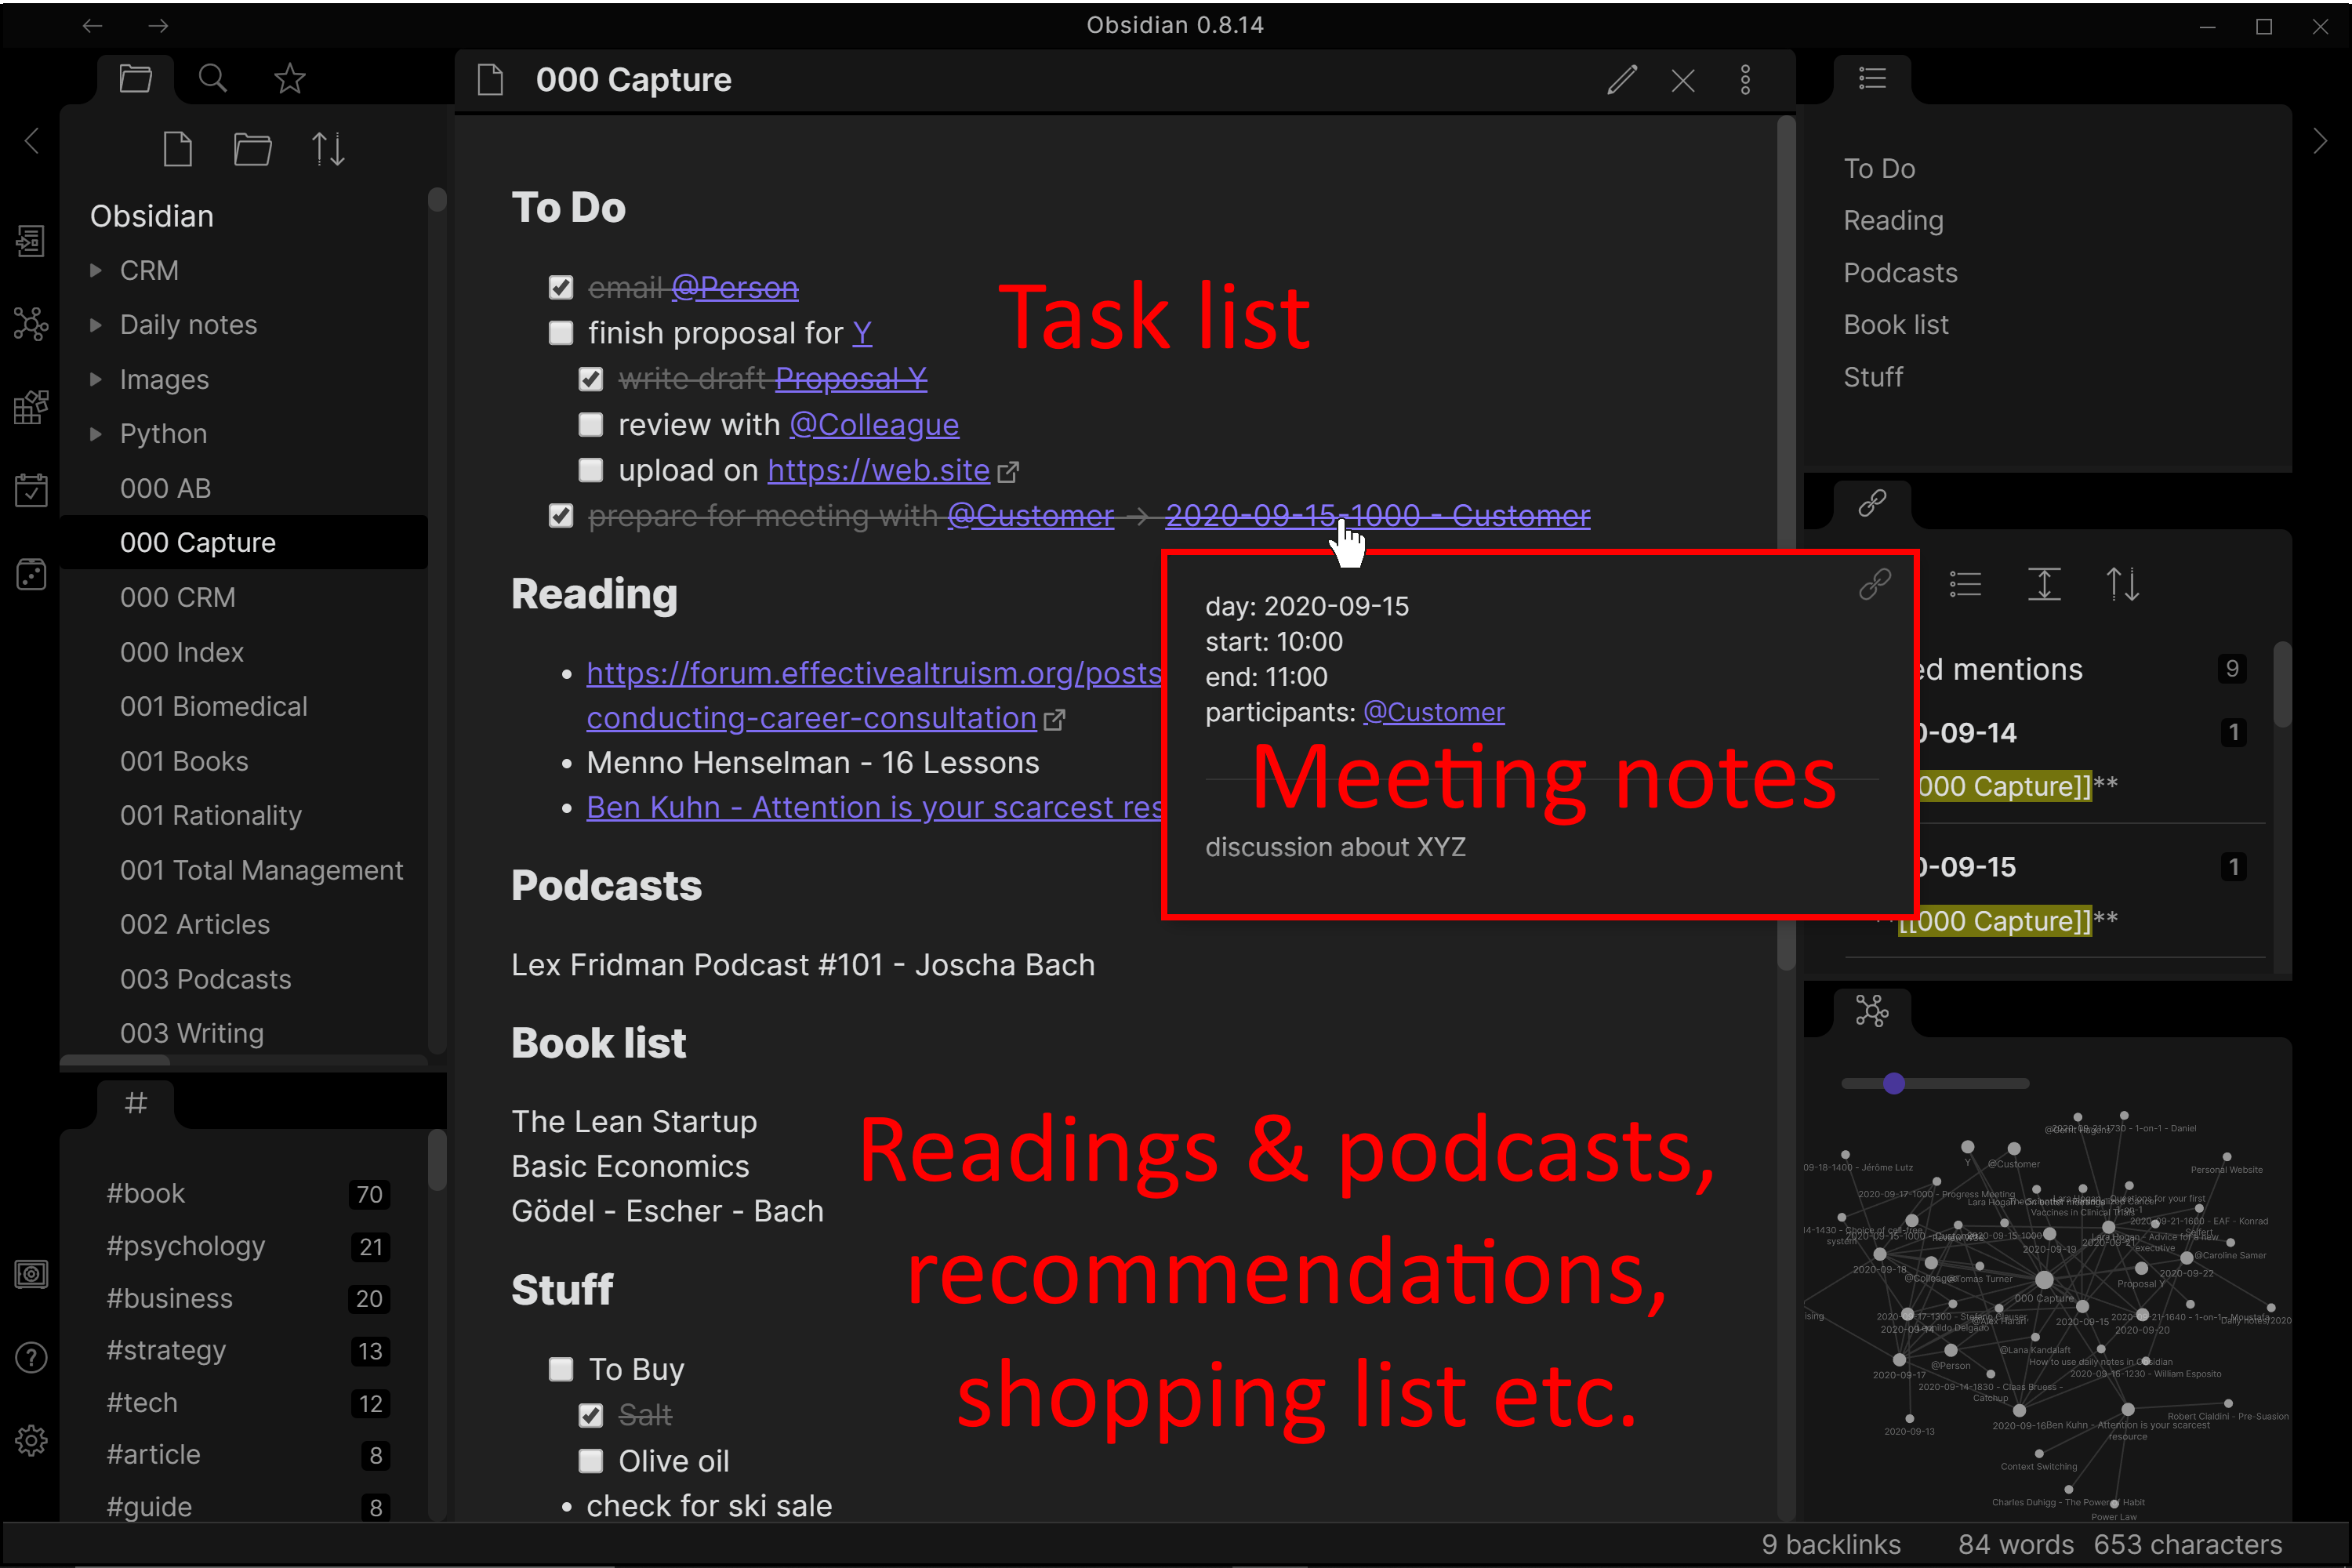 how-to-use-daily-notes-in-obsidian